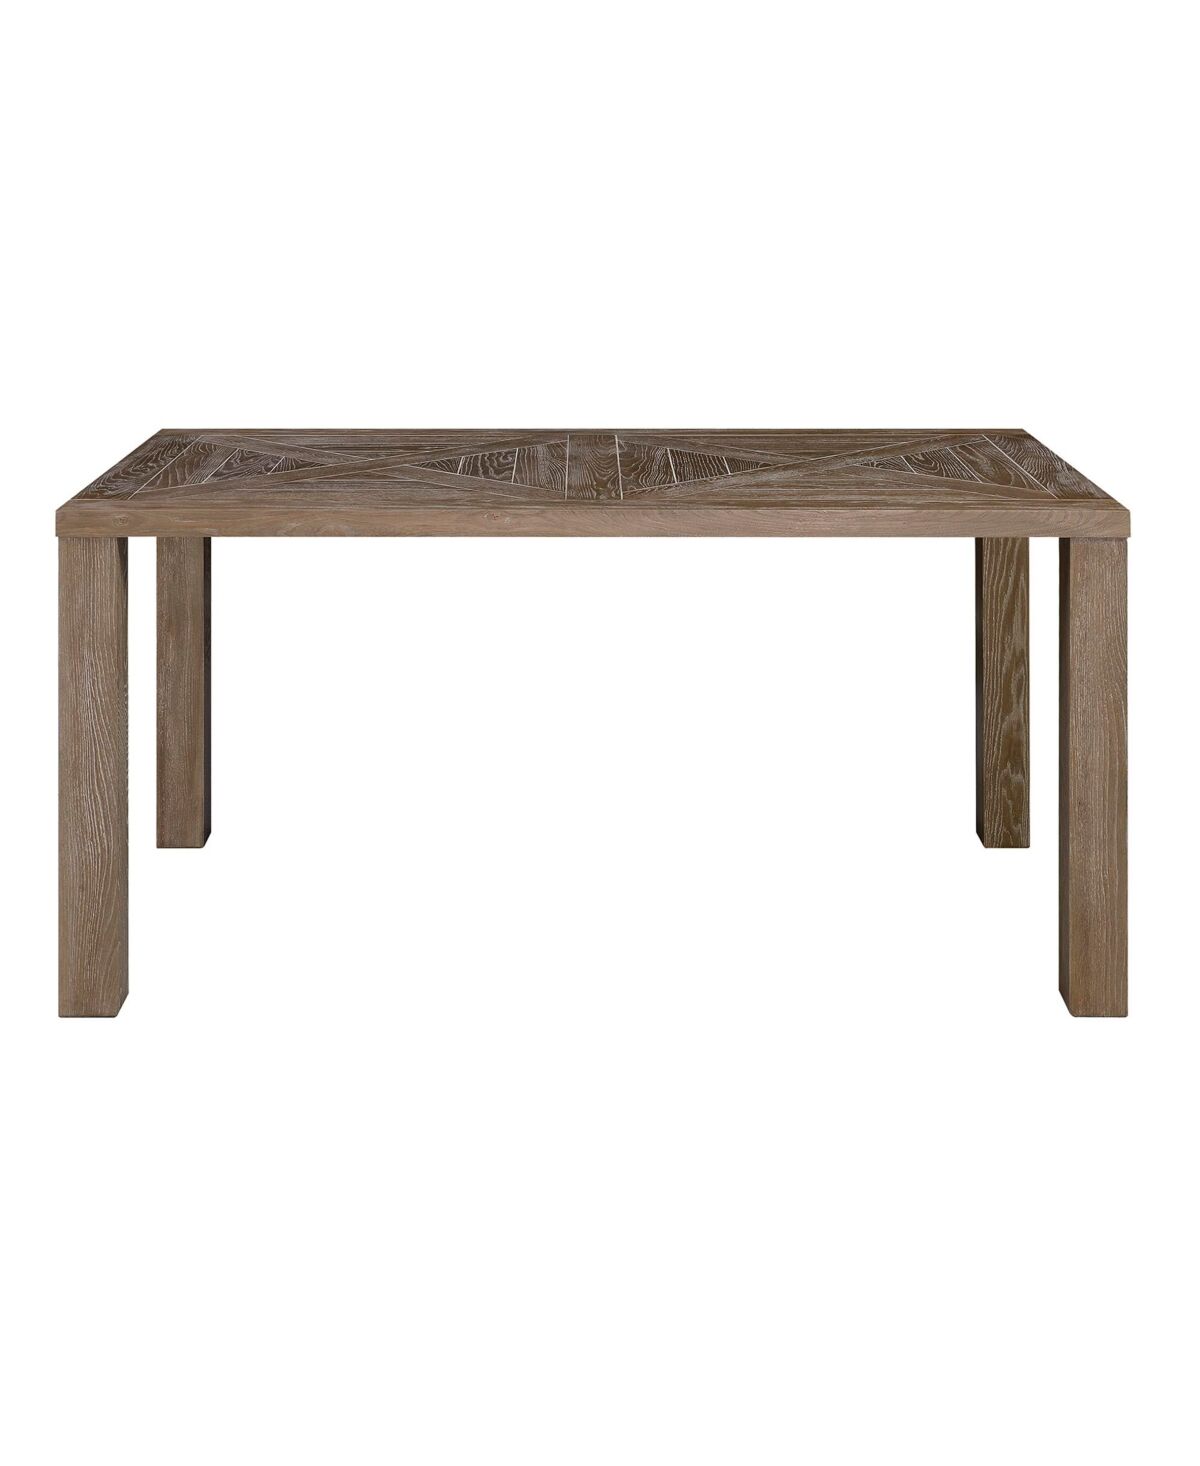 Elle Decor Marias Dining Table - Brown